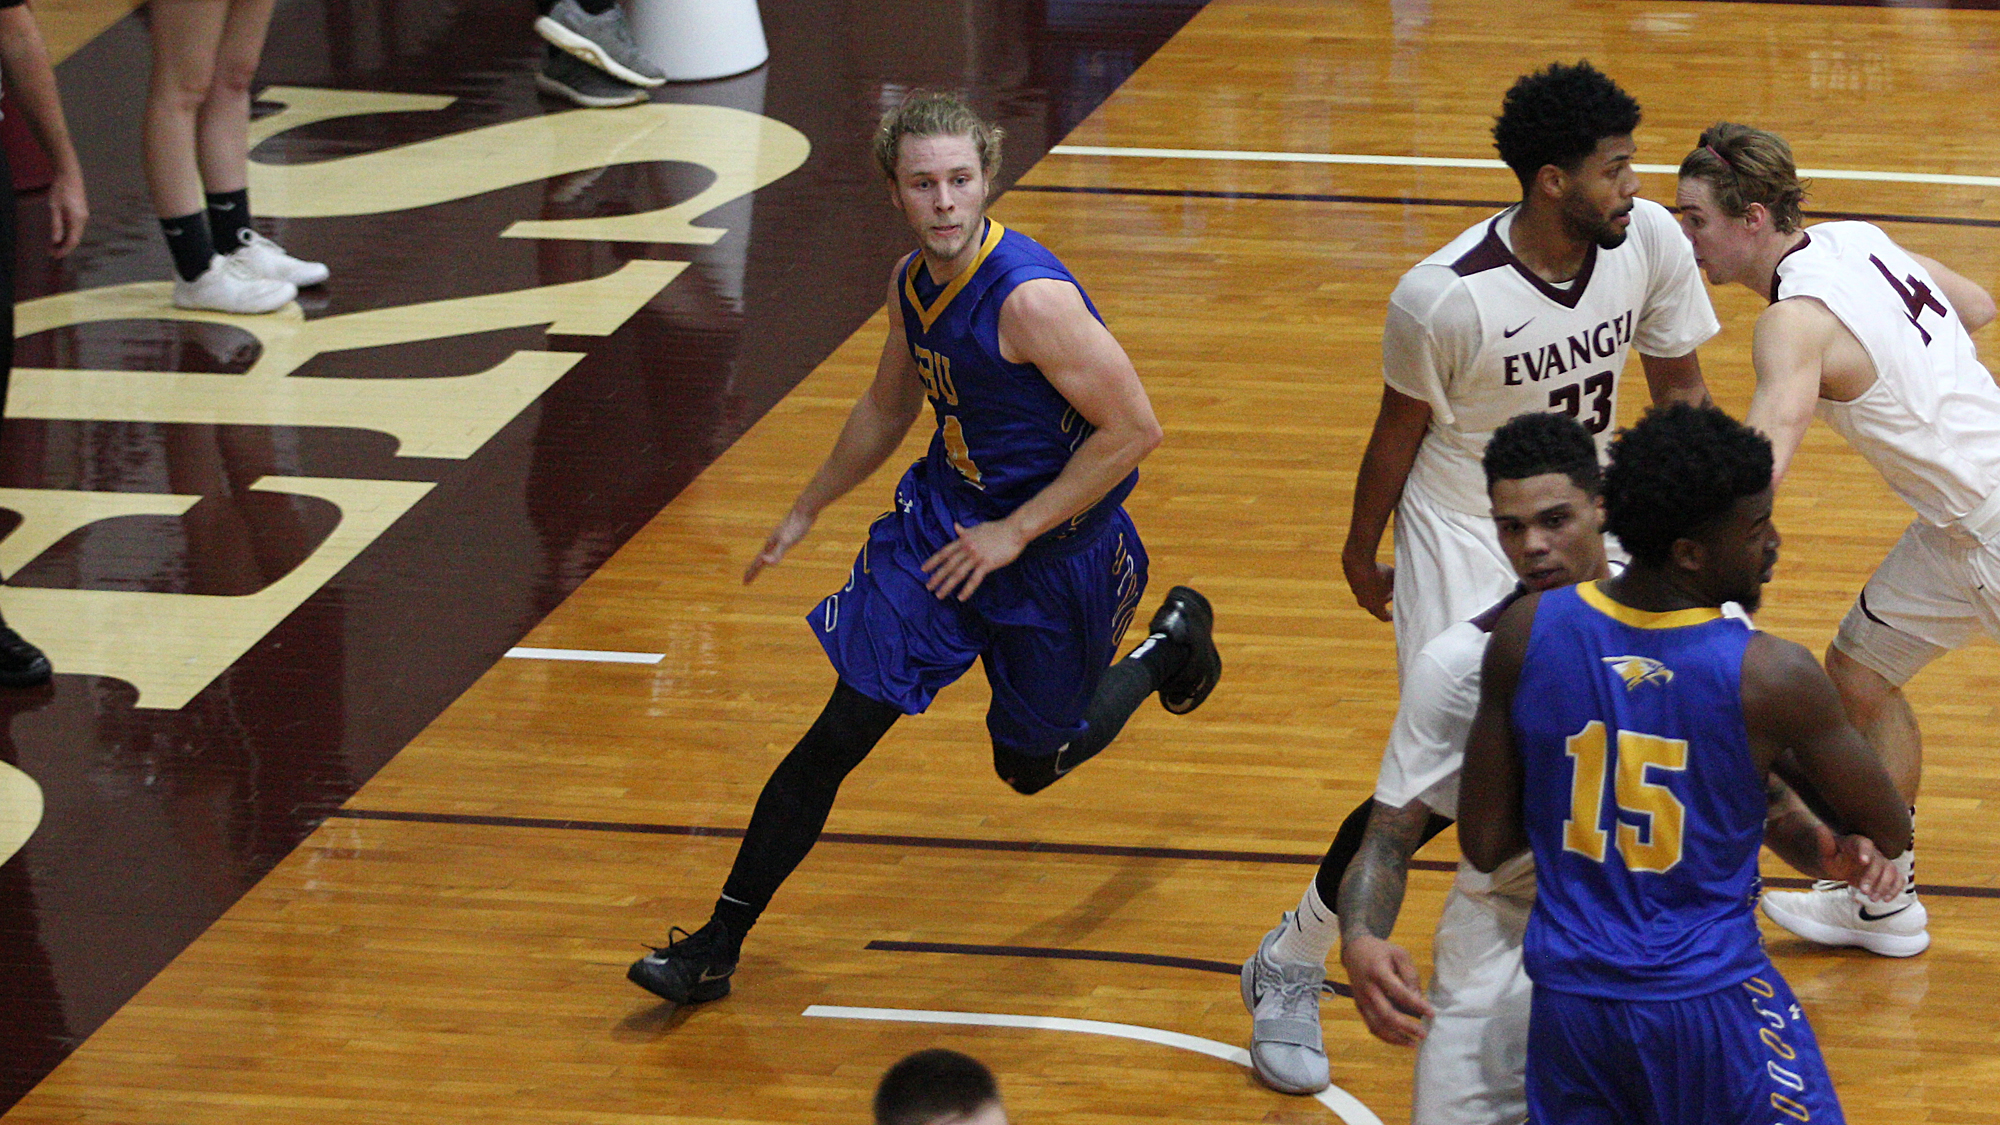 Caudle catches fire, men’s basketball holds on at Evangel